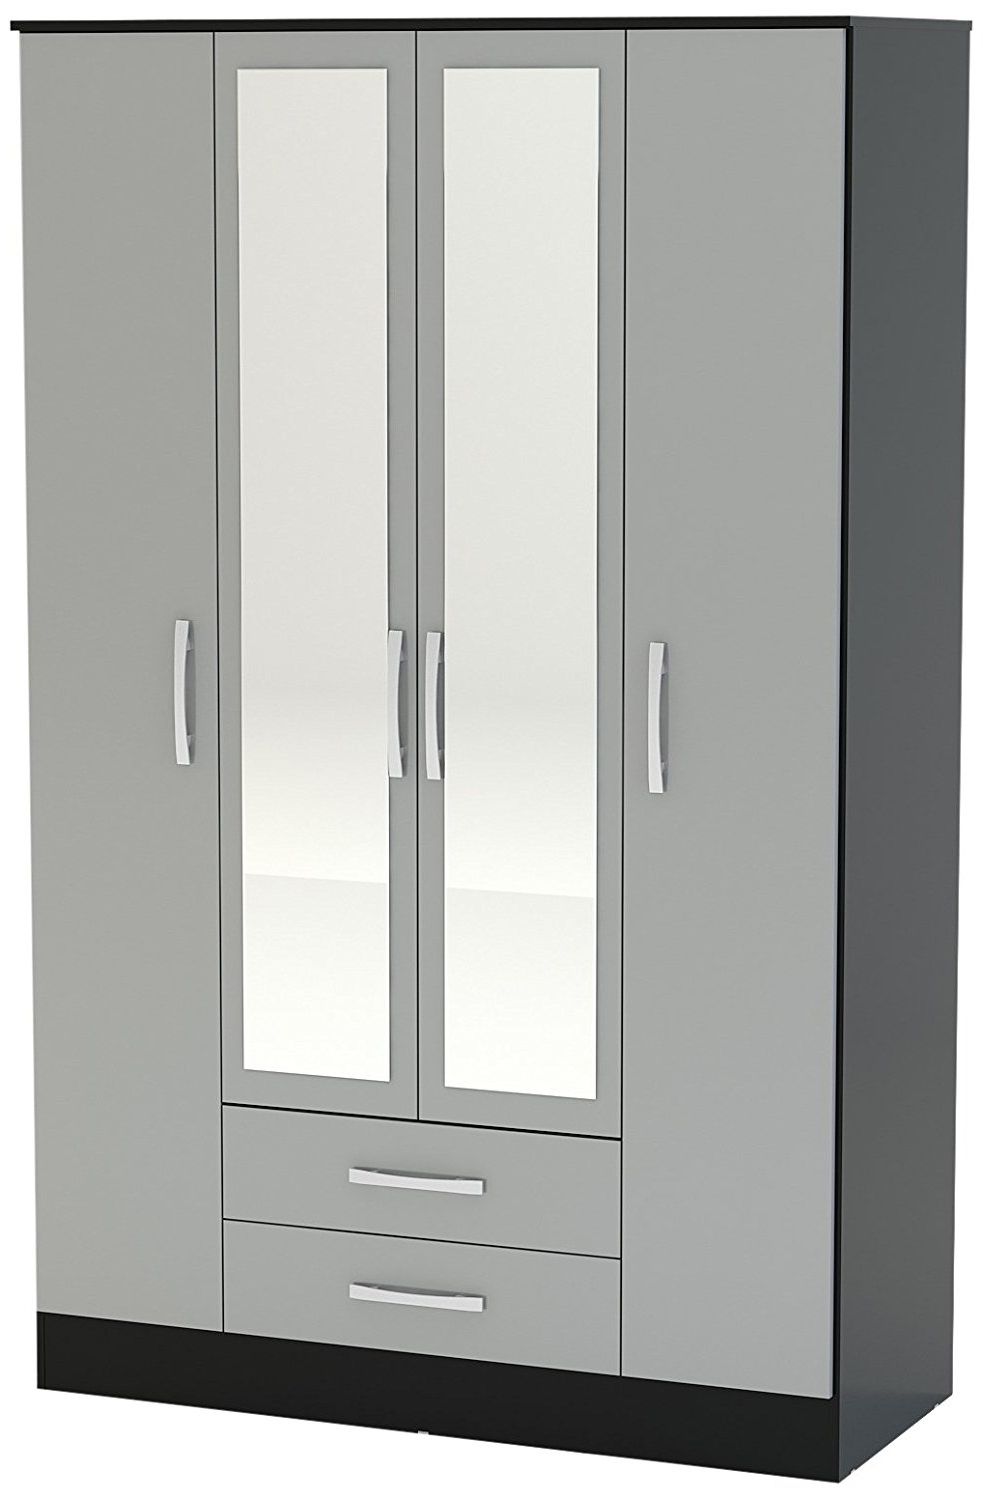 4 Door Wardrobes With Mirror And Drawers Within Famous Birlea Lynx 4 Door 2 Drawer Wardrobe With Mirror – High Gloss (View 5 of 15)